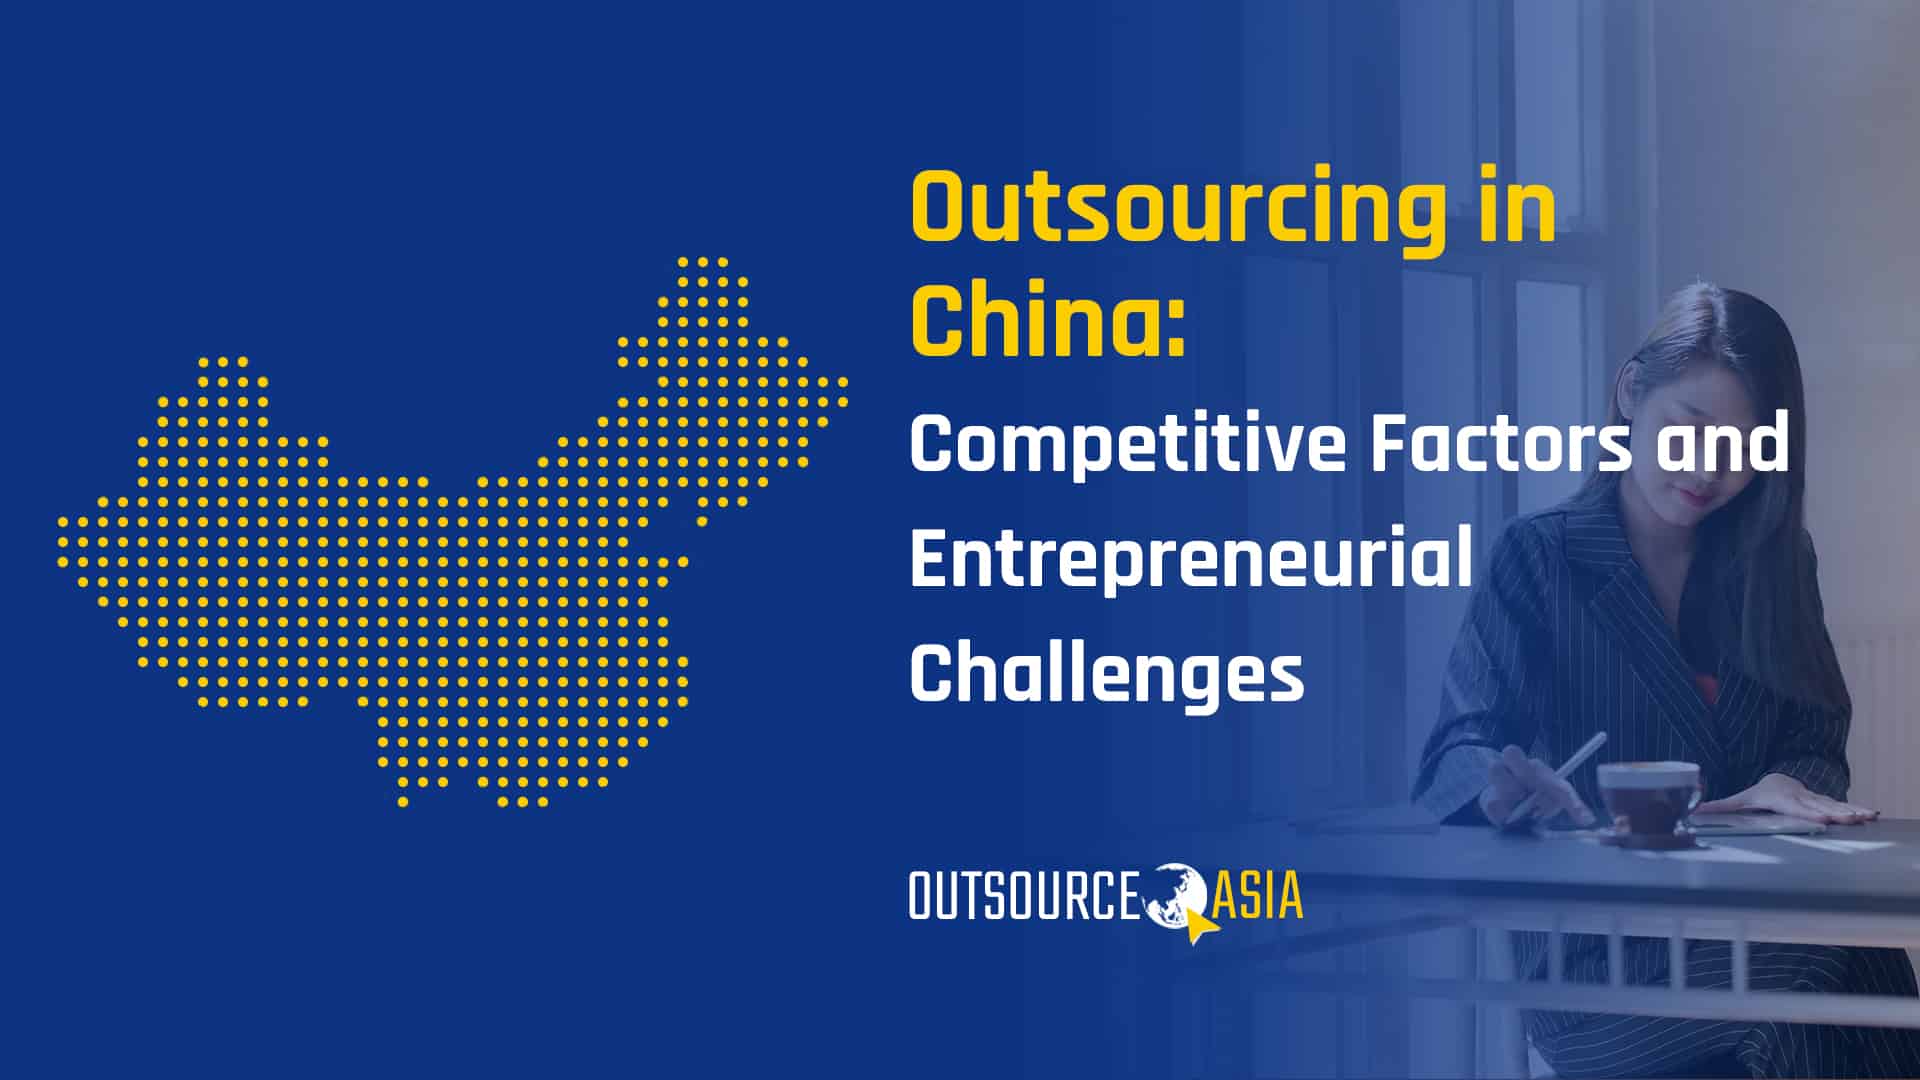 Outsourcing in China